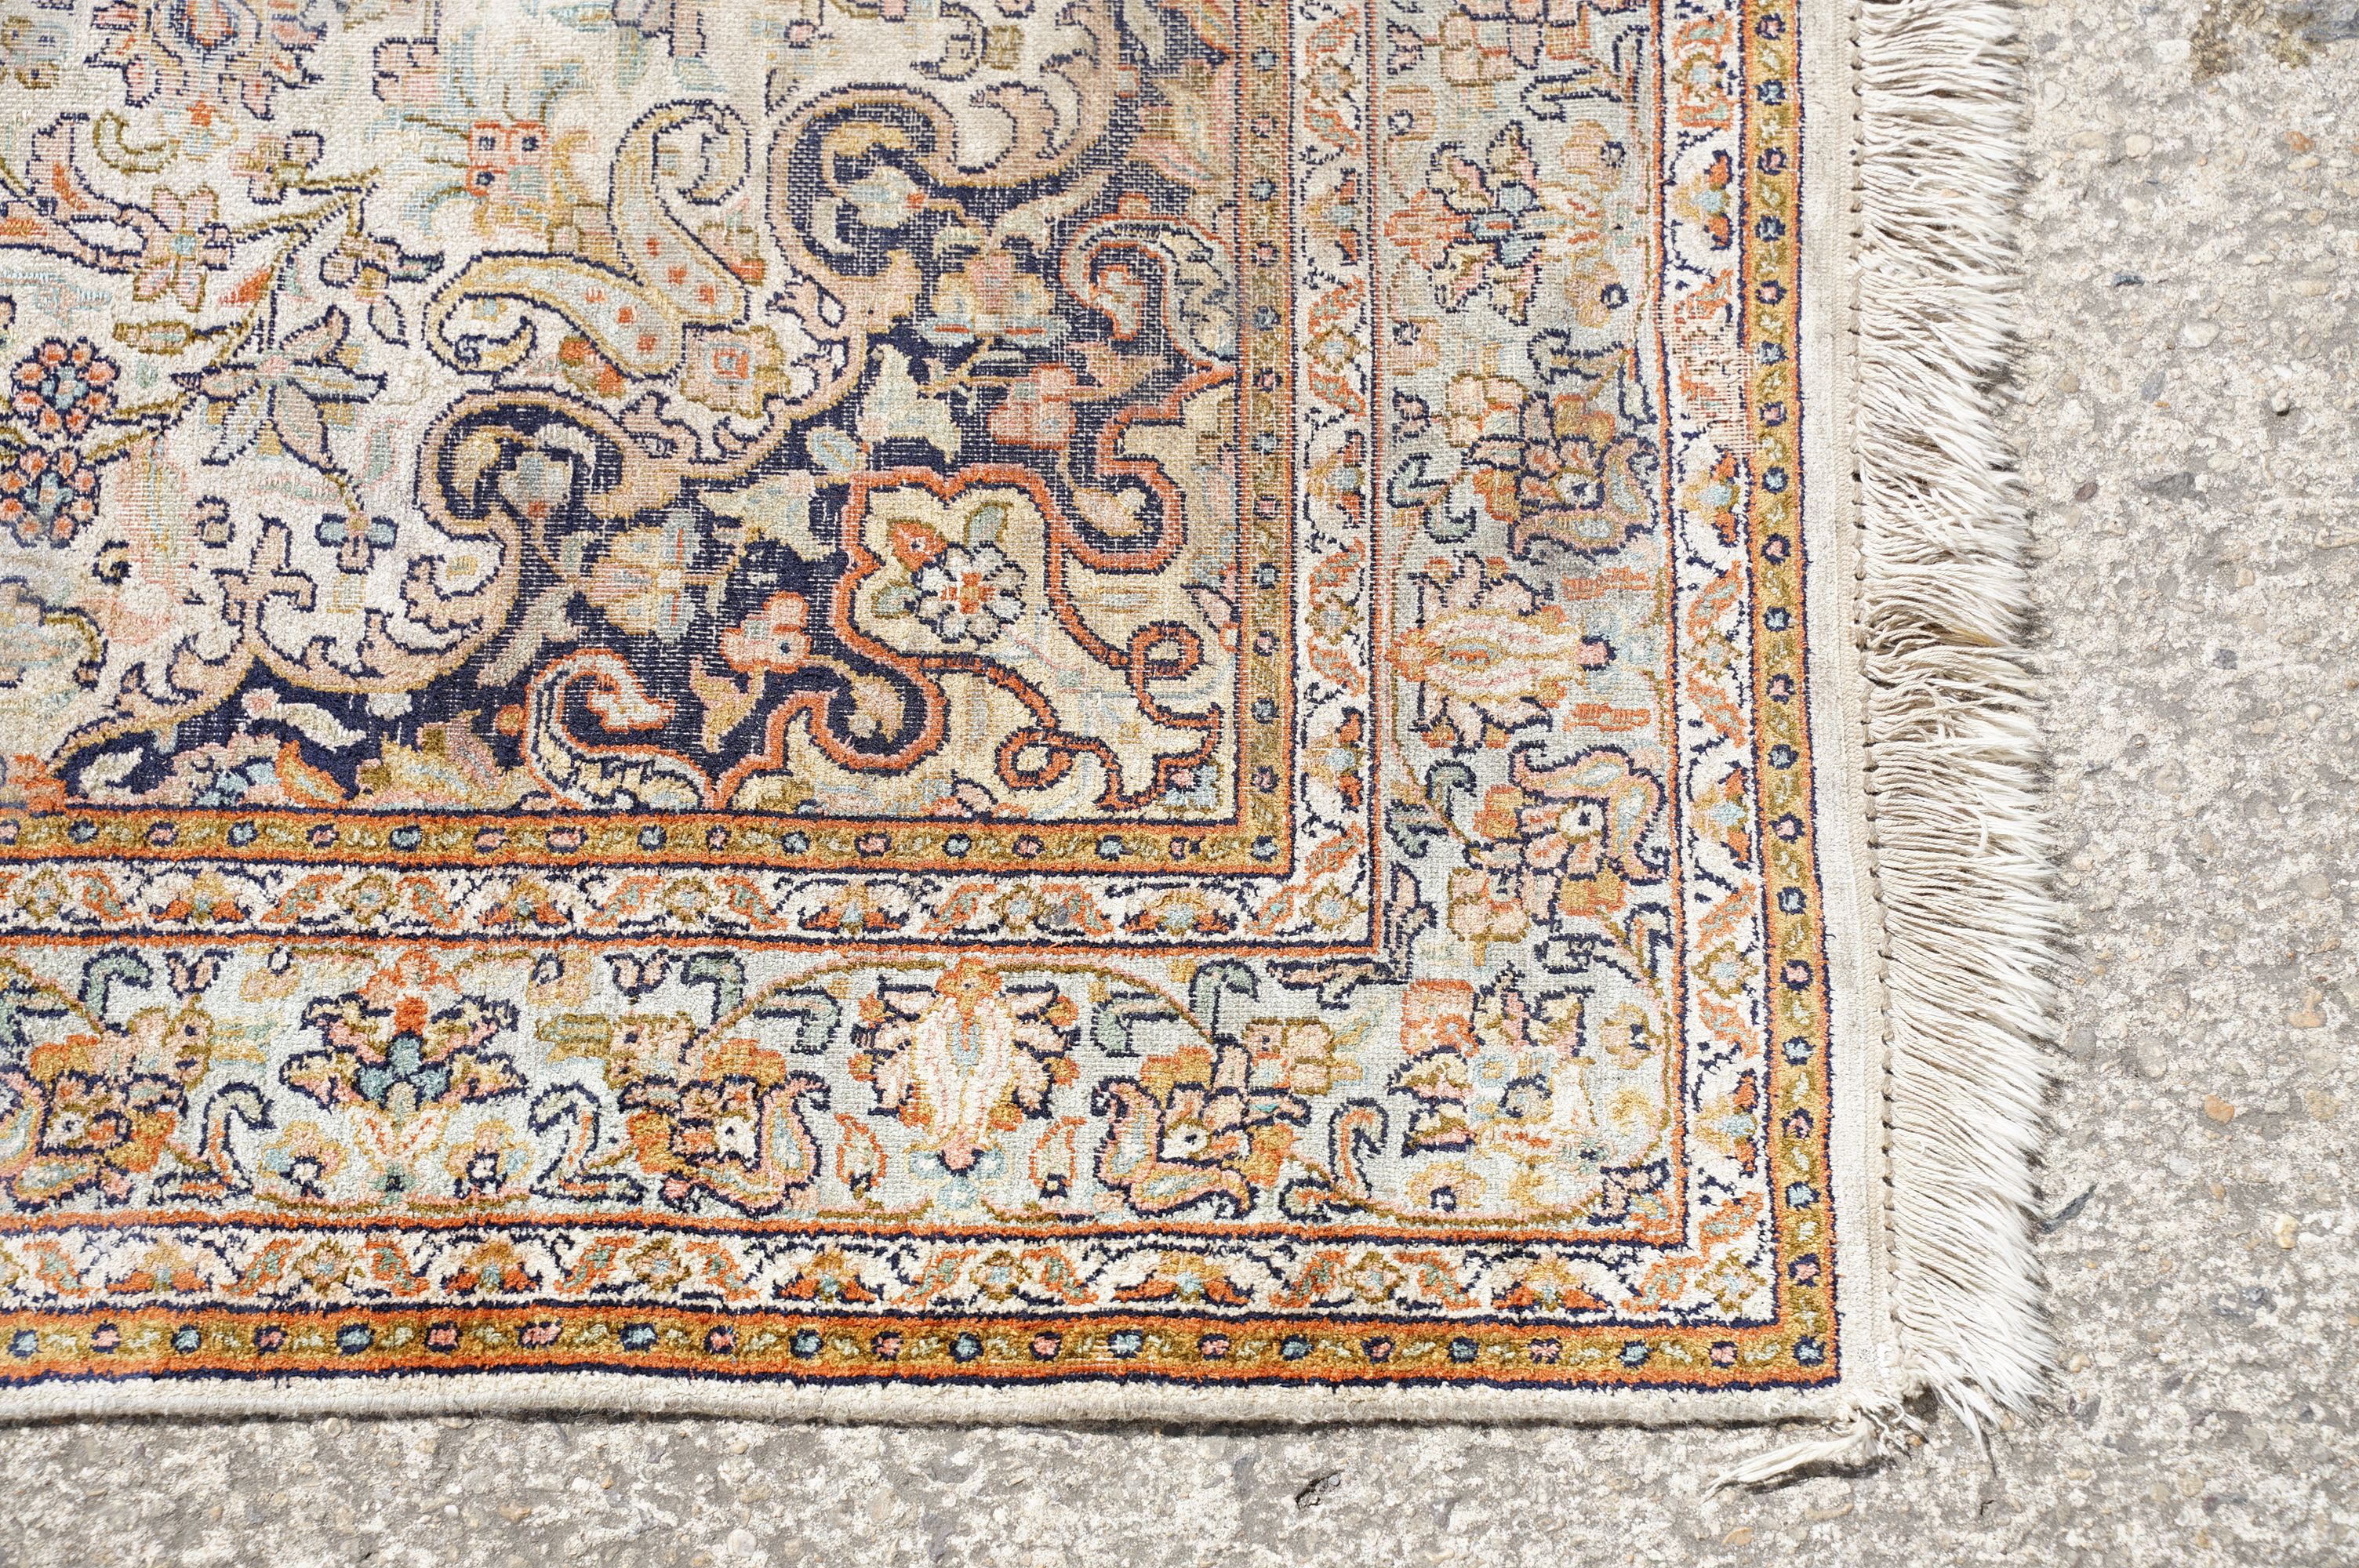 Middle Eastern cream ground carpet, with central stylised motif within geometric borders, 160 x 92cm - Image 6 of 14